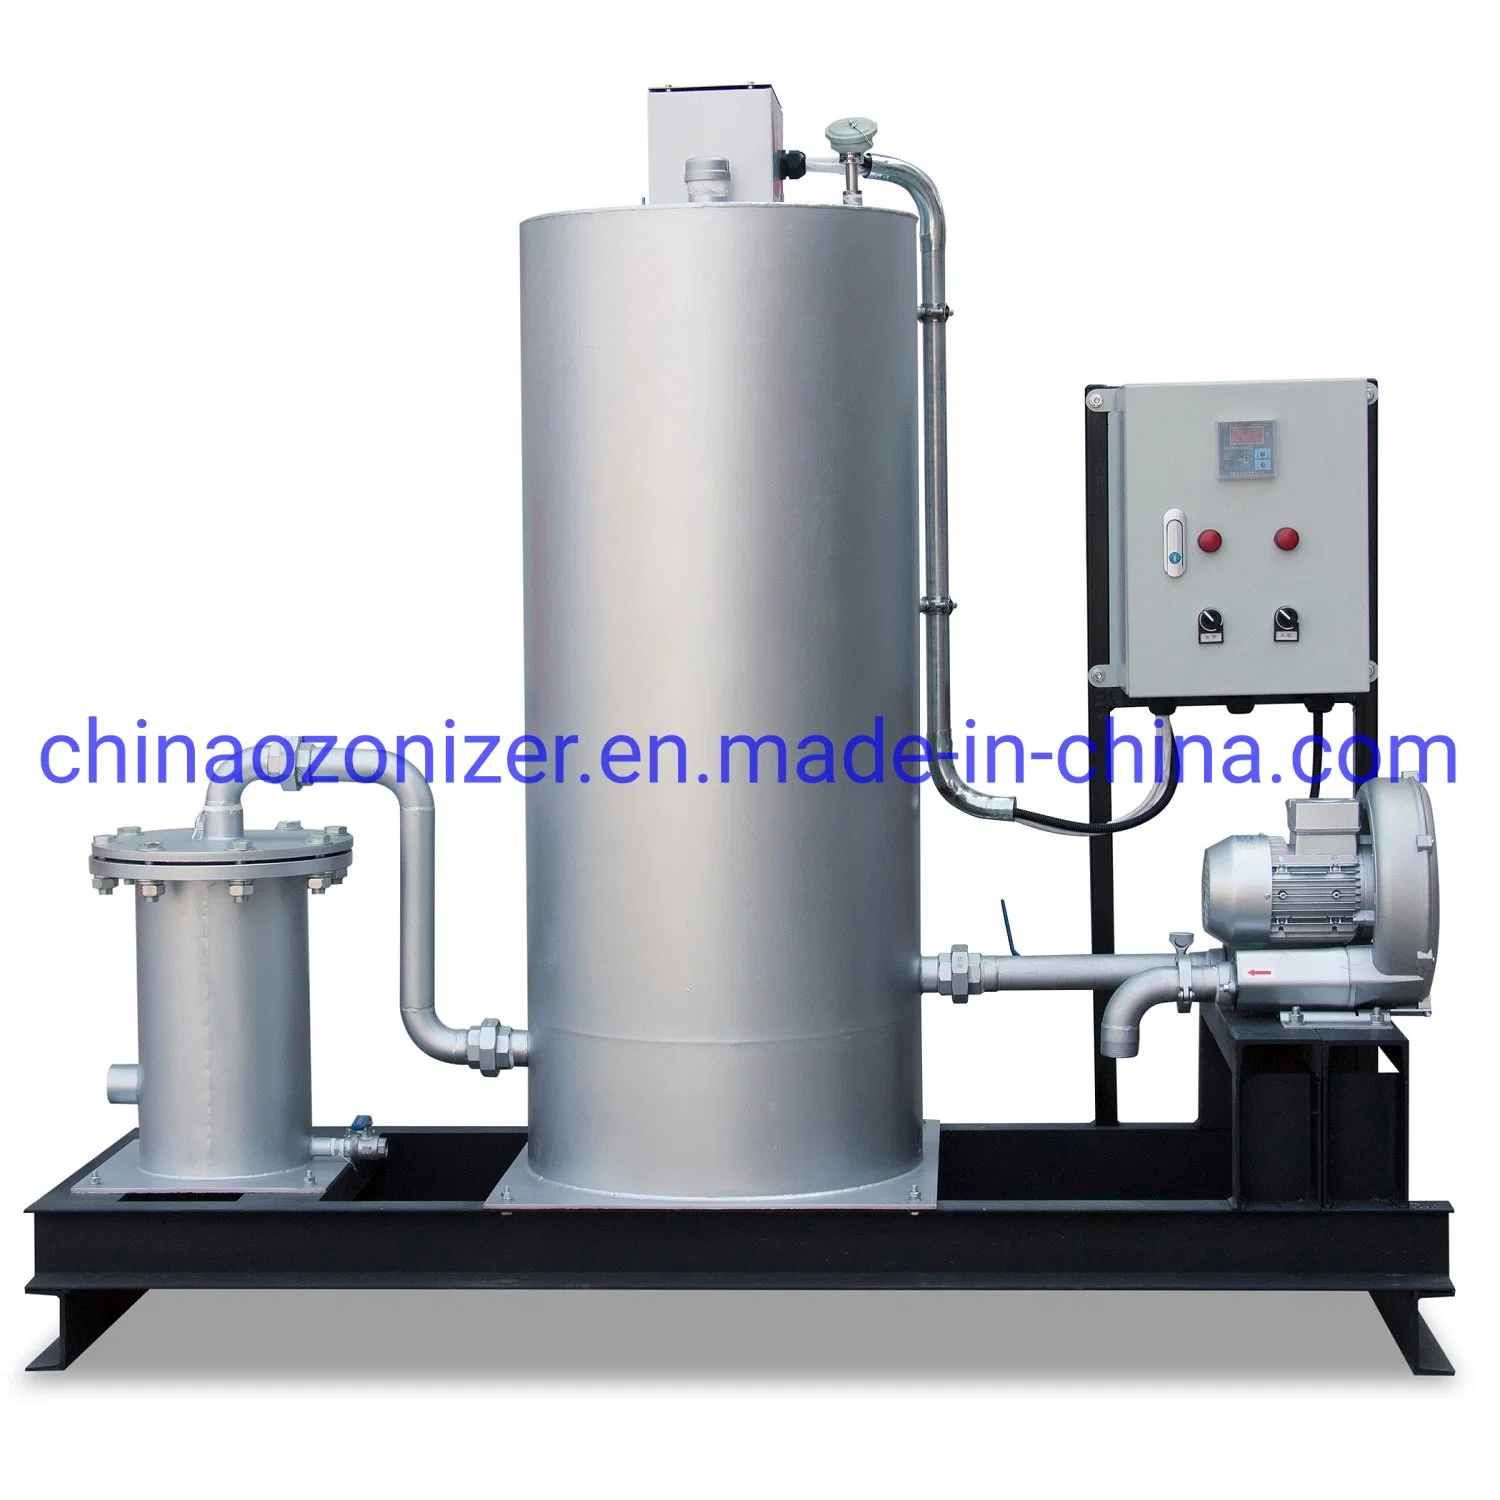 Air Source and Oxygen Source 5-10kg/H Ozonizer for Farm Feeding Water, Beverage Plant, Industrial Wastewater Treatment